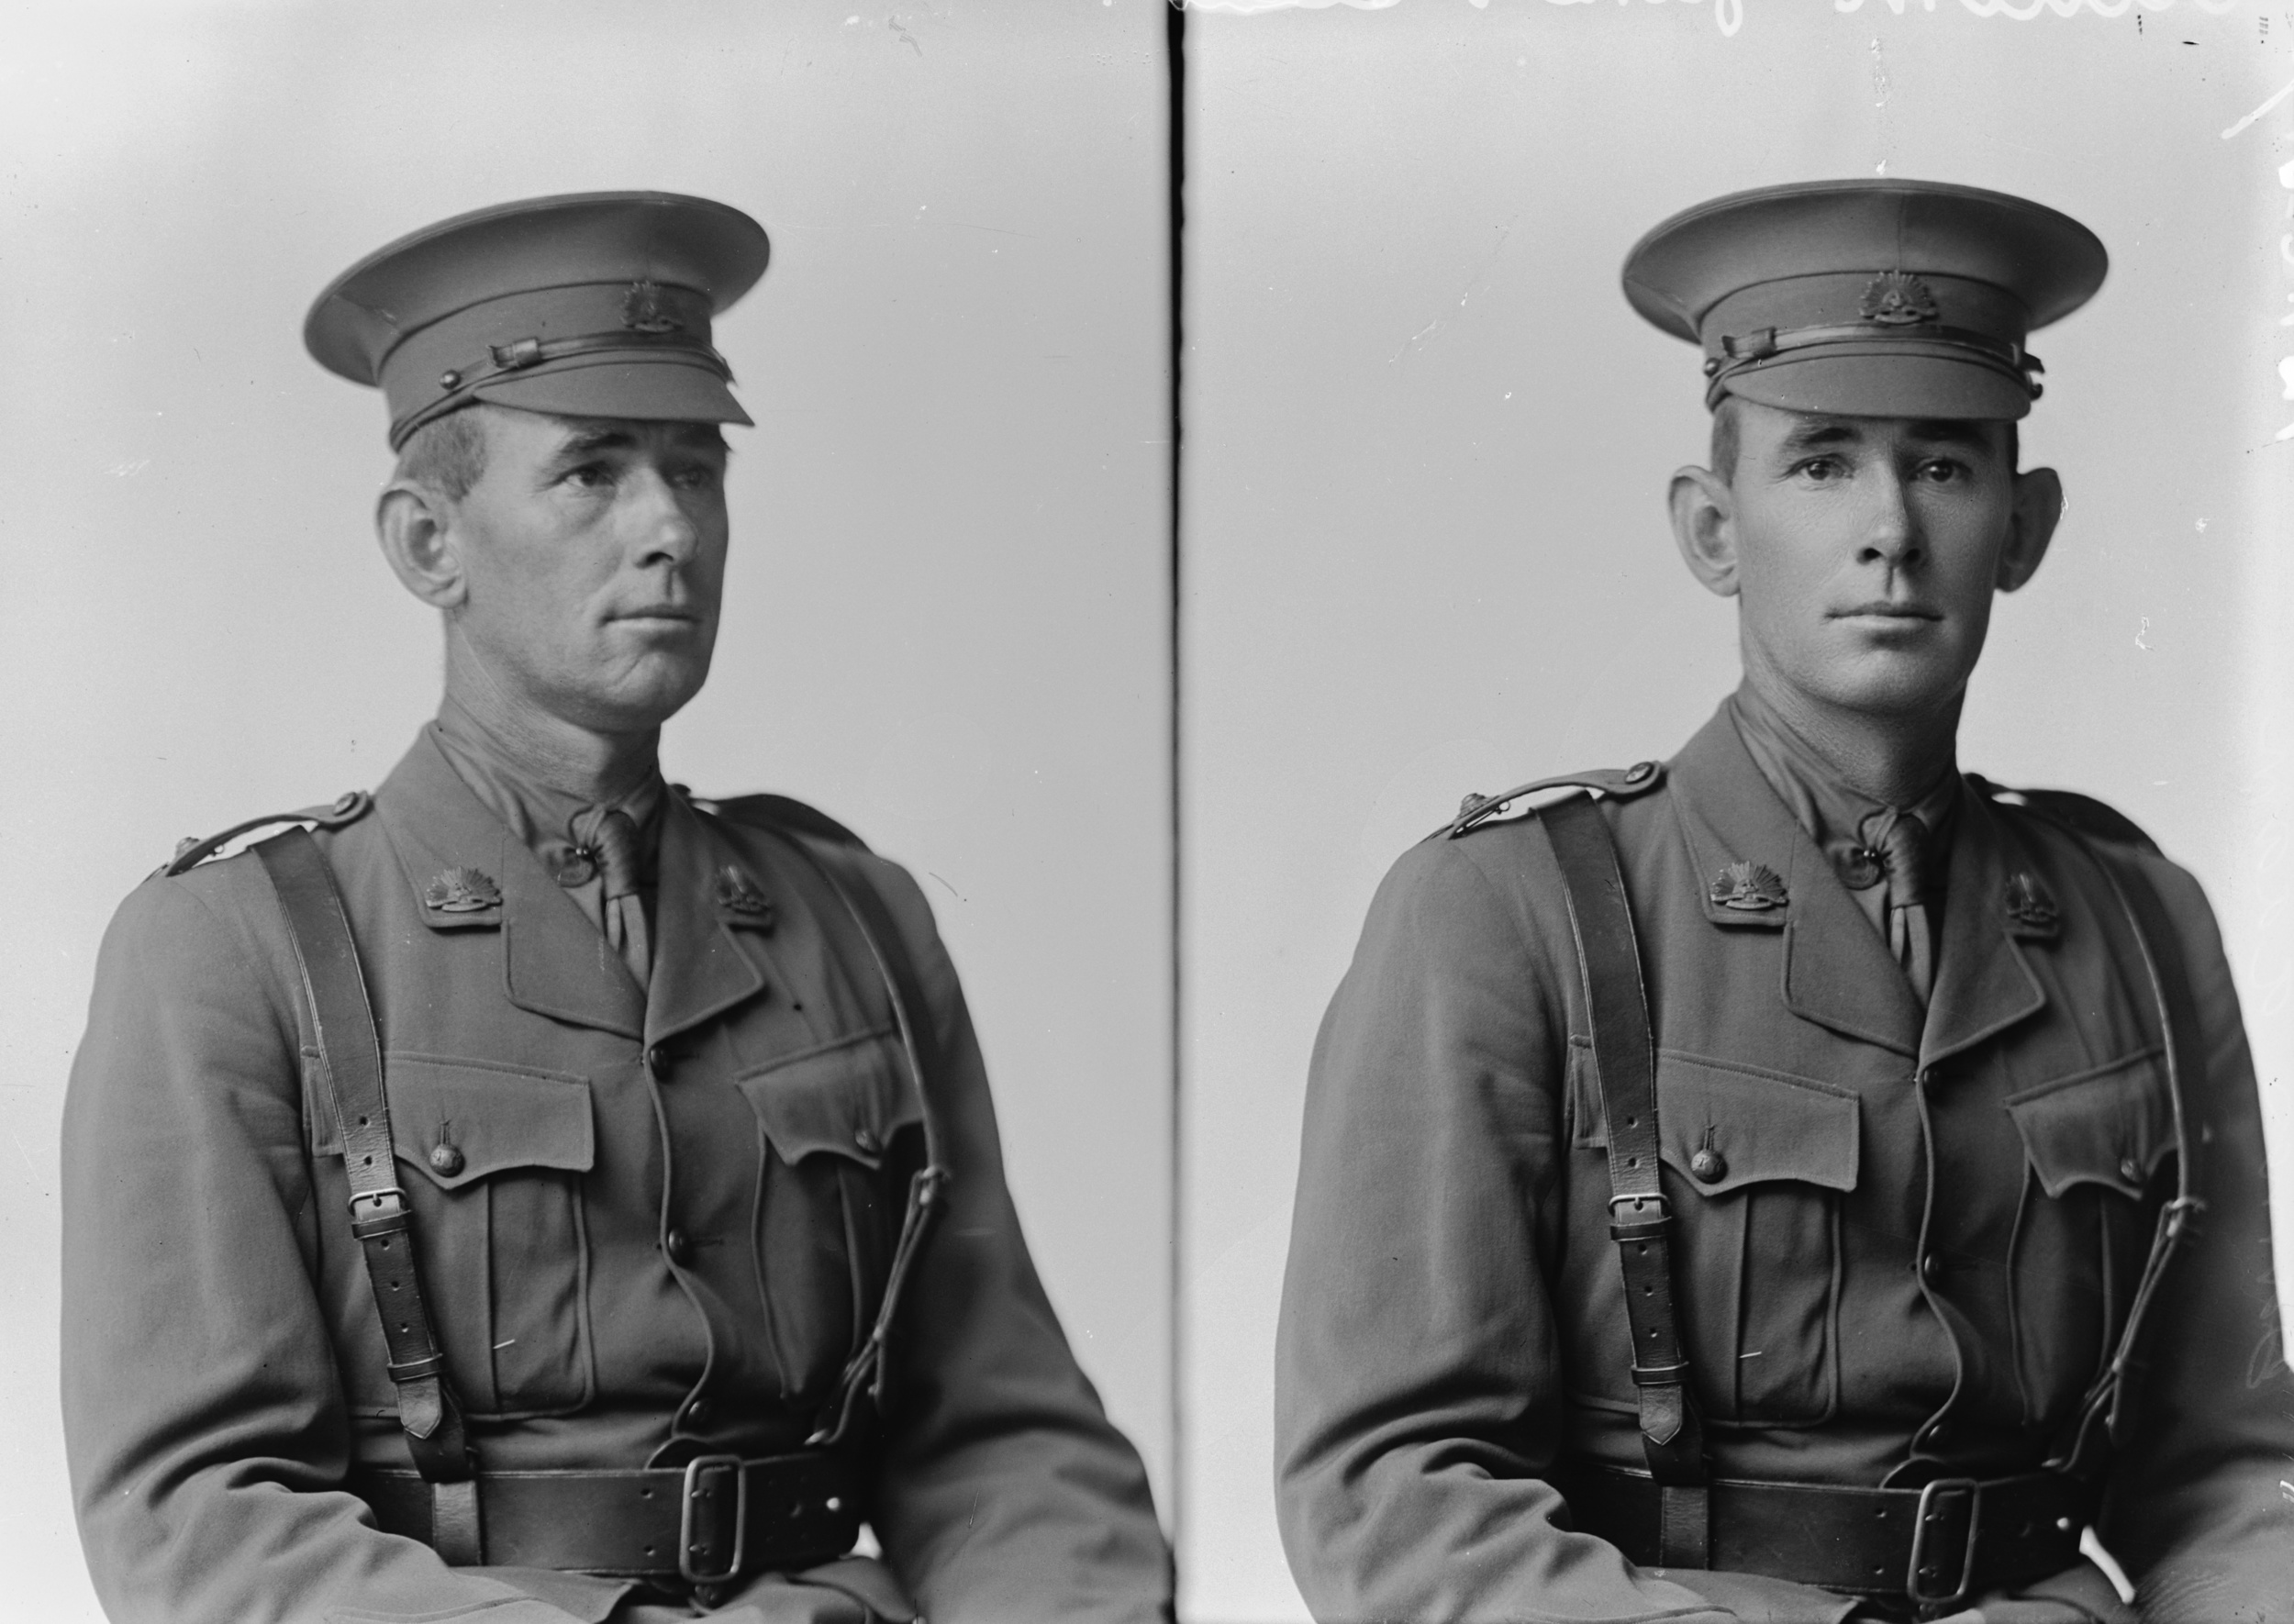 Photographed at the Dease Studio, 117 Barrack Street Perth WA Image courtesy of the State Library of Western Australia: 108199PD